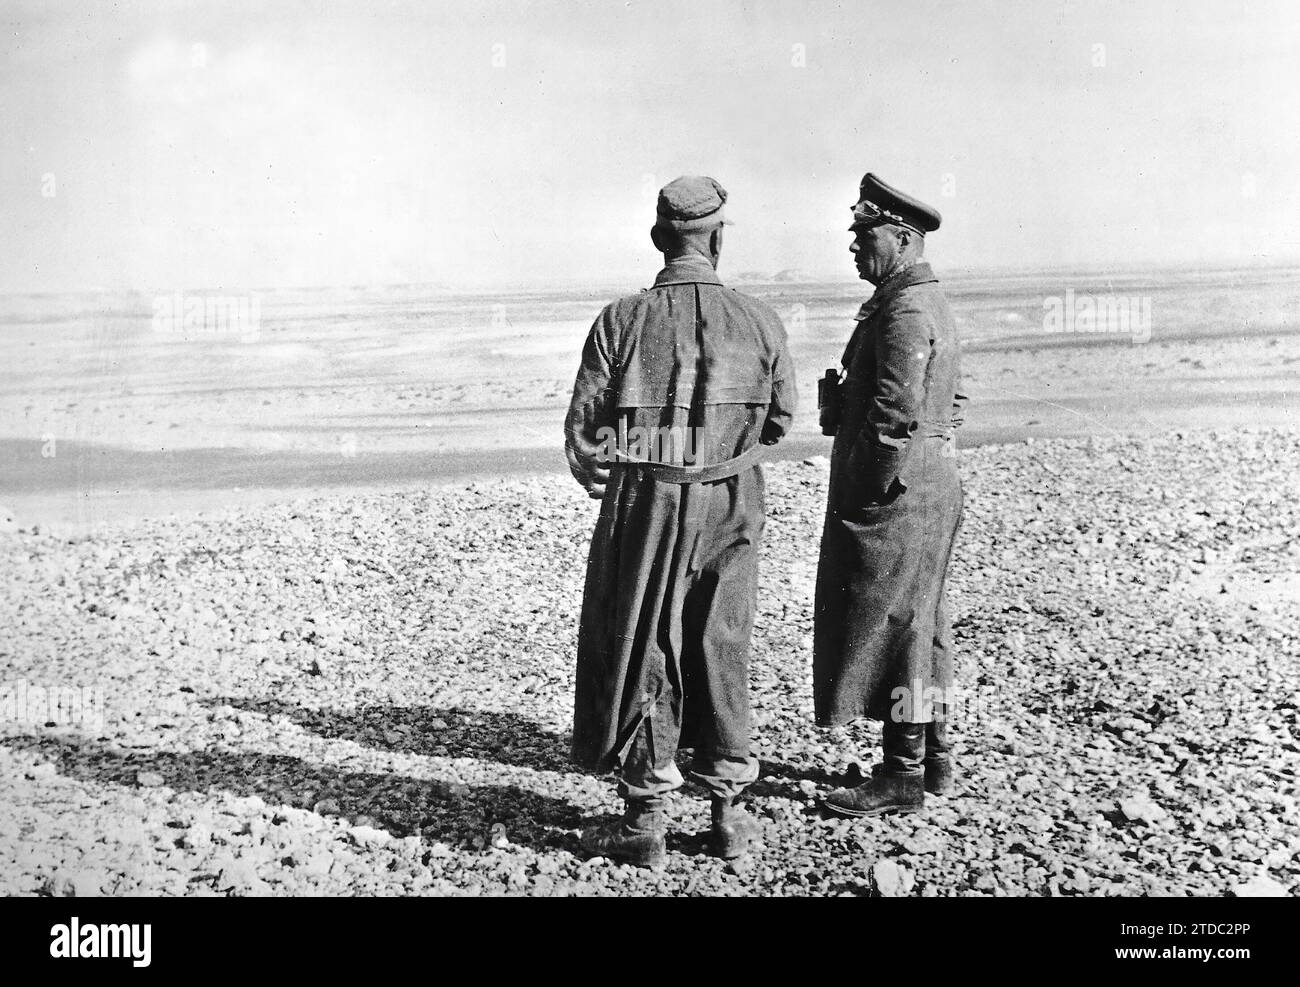 01/01/1942. Marshal Erwin Rommel led the operations of German troops in the North African desert. Credit: Album / Archivo ABC Stock Photo